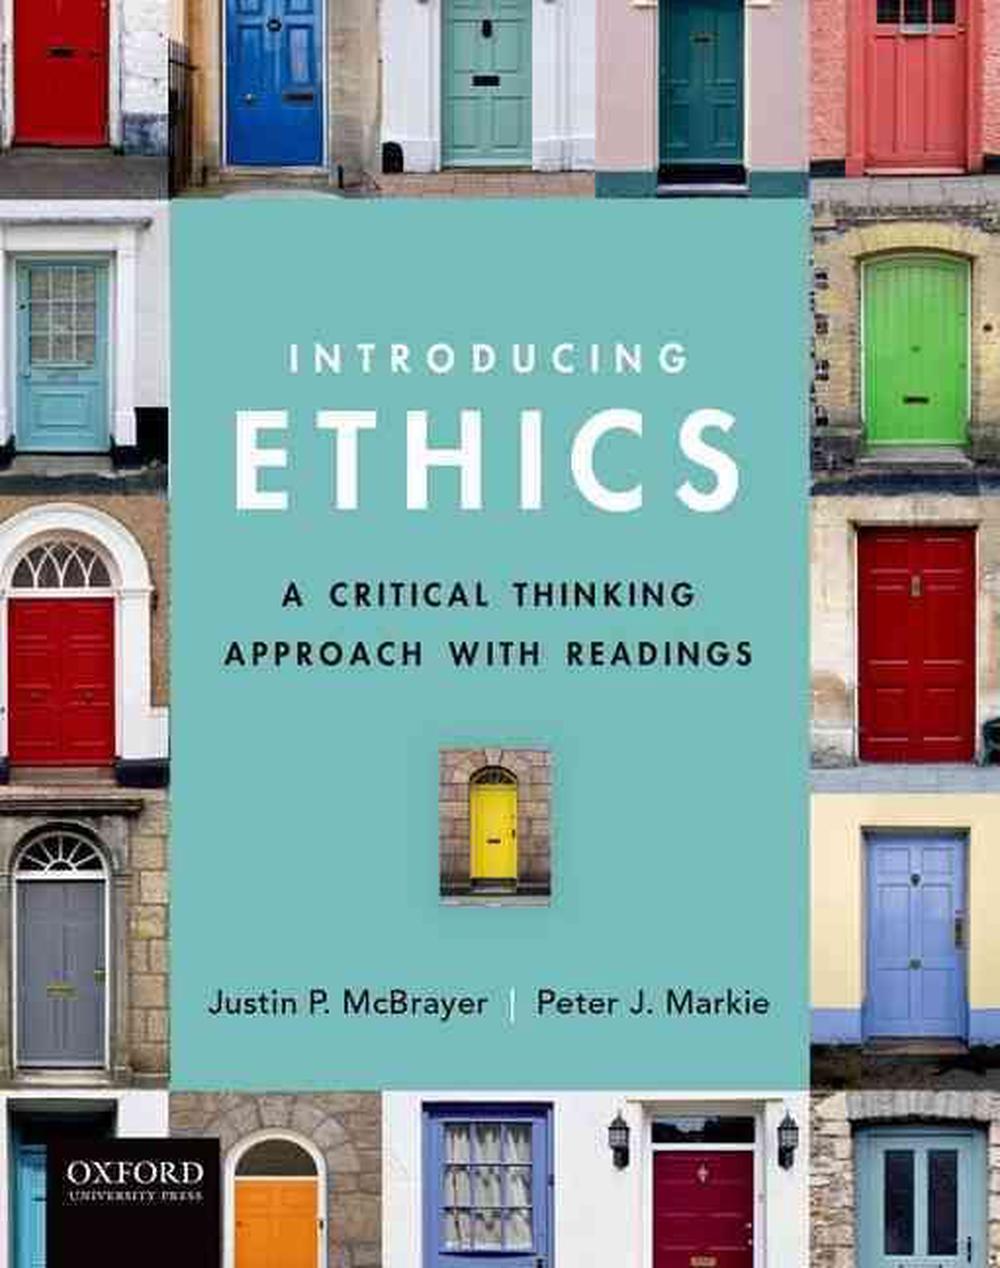 critical thinking and ethics course